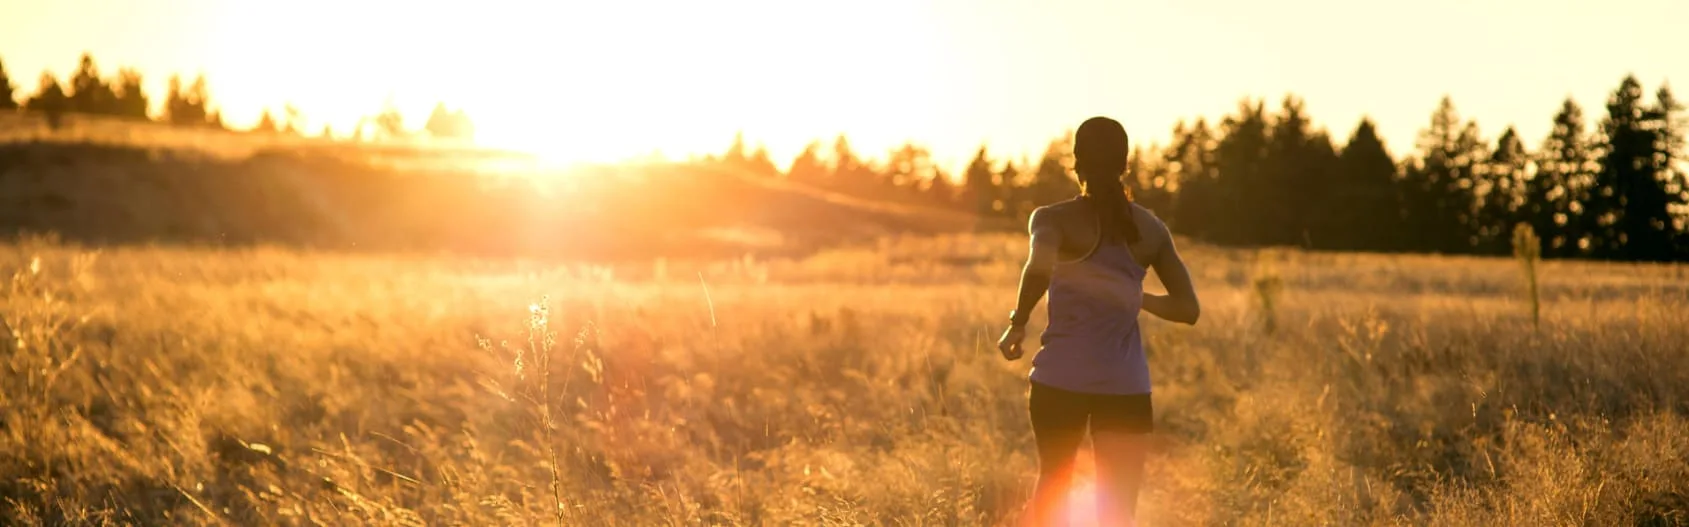 How to Flush Alcohol Out of Your System - an image of a woman going for a run in a open field during sunset